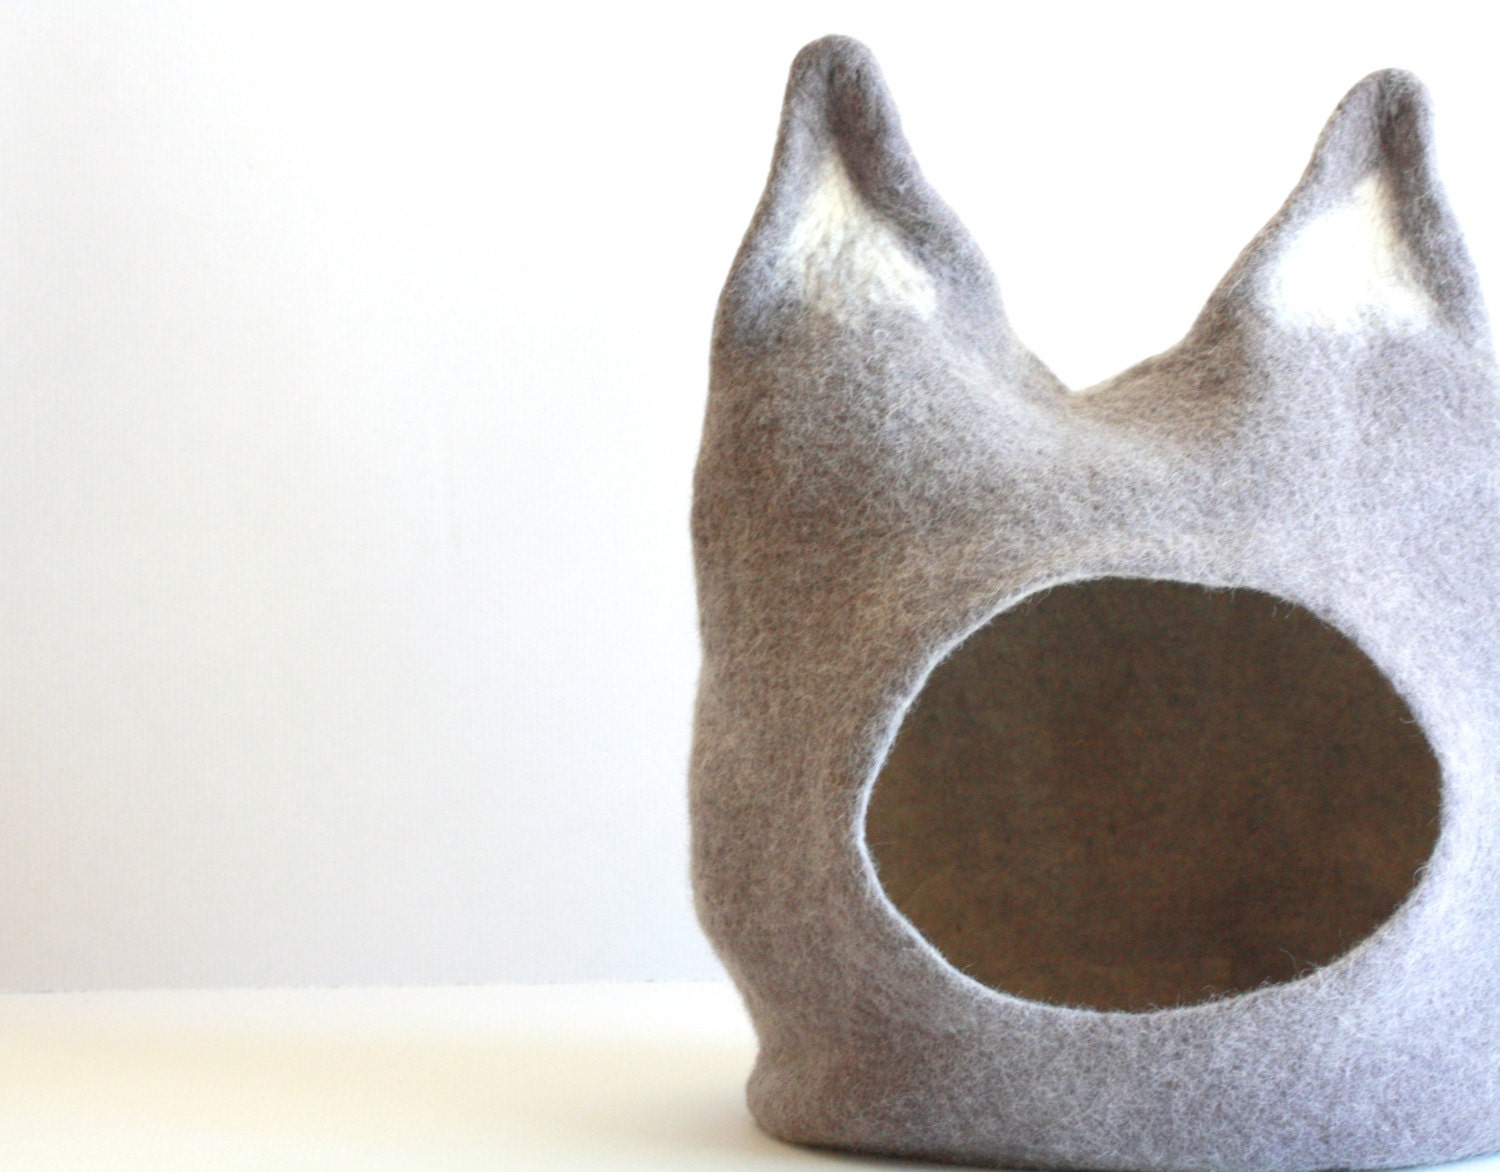 Cat bed - cat cave - cat house - eco-friendly handmade felted wool cat bed - grey with natural white - made to order - AgnesFelt